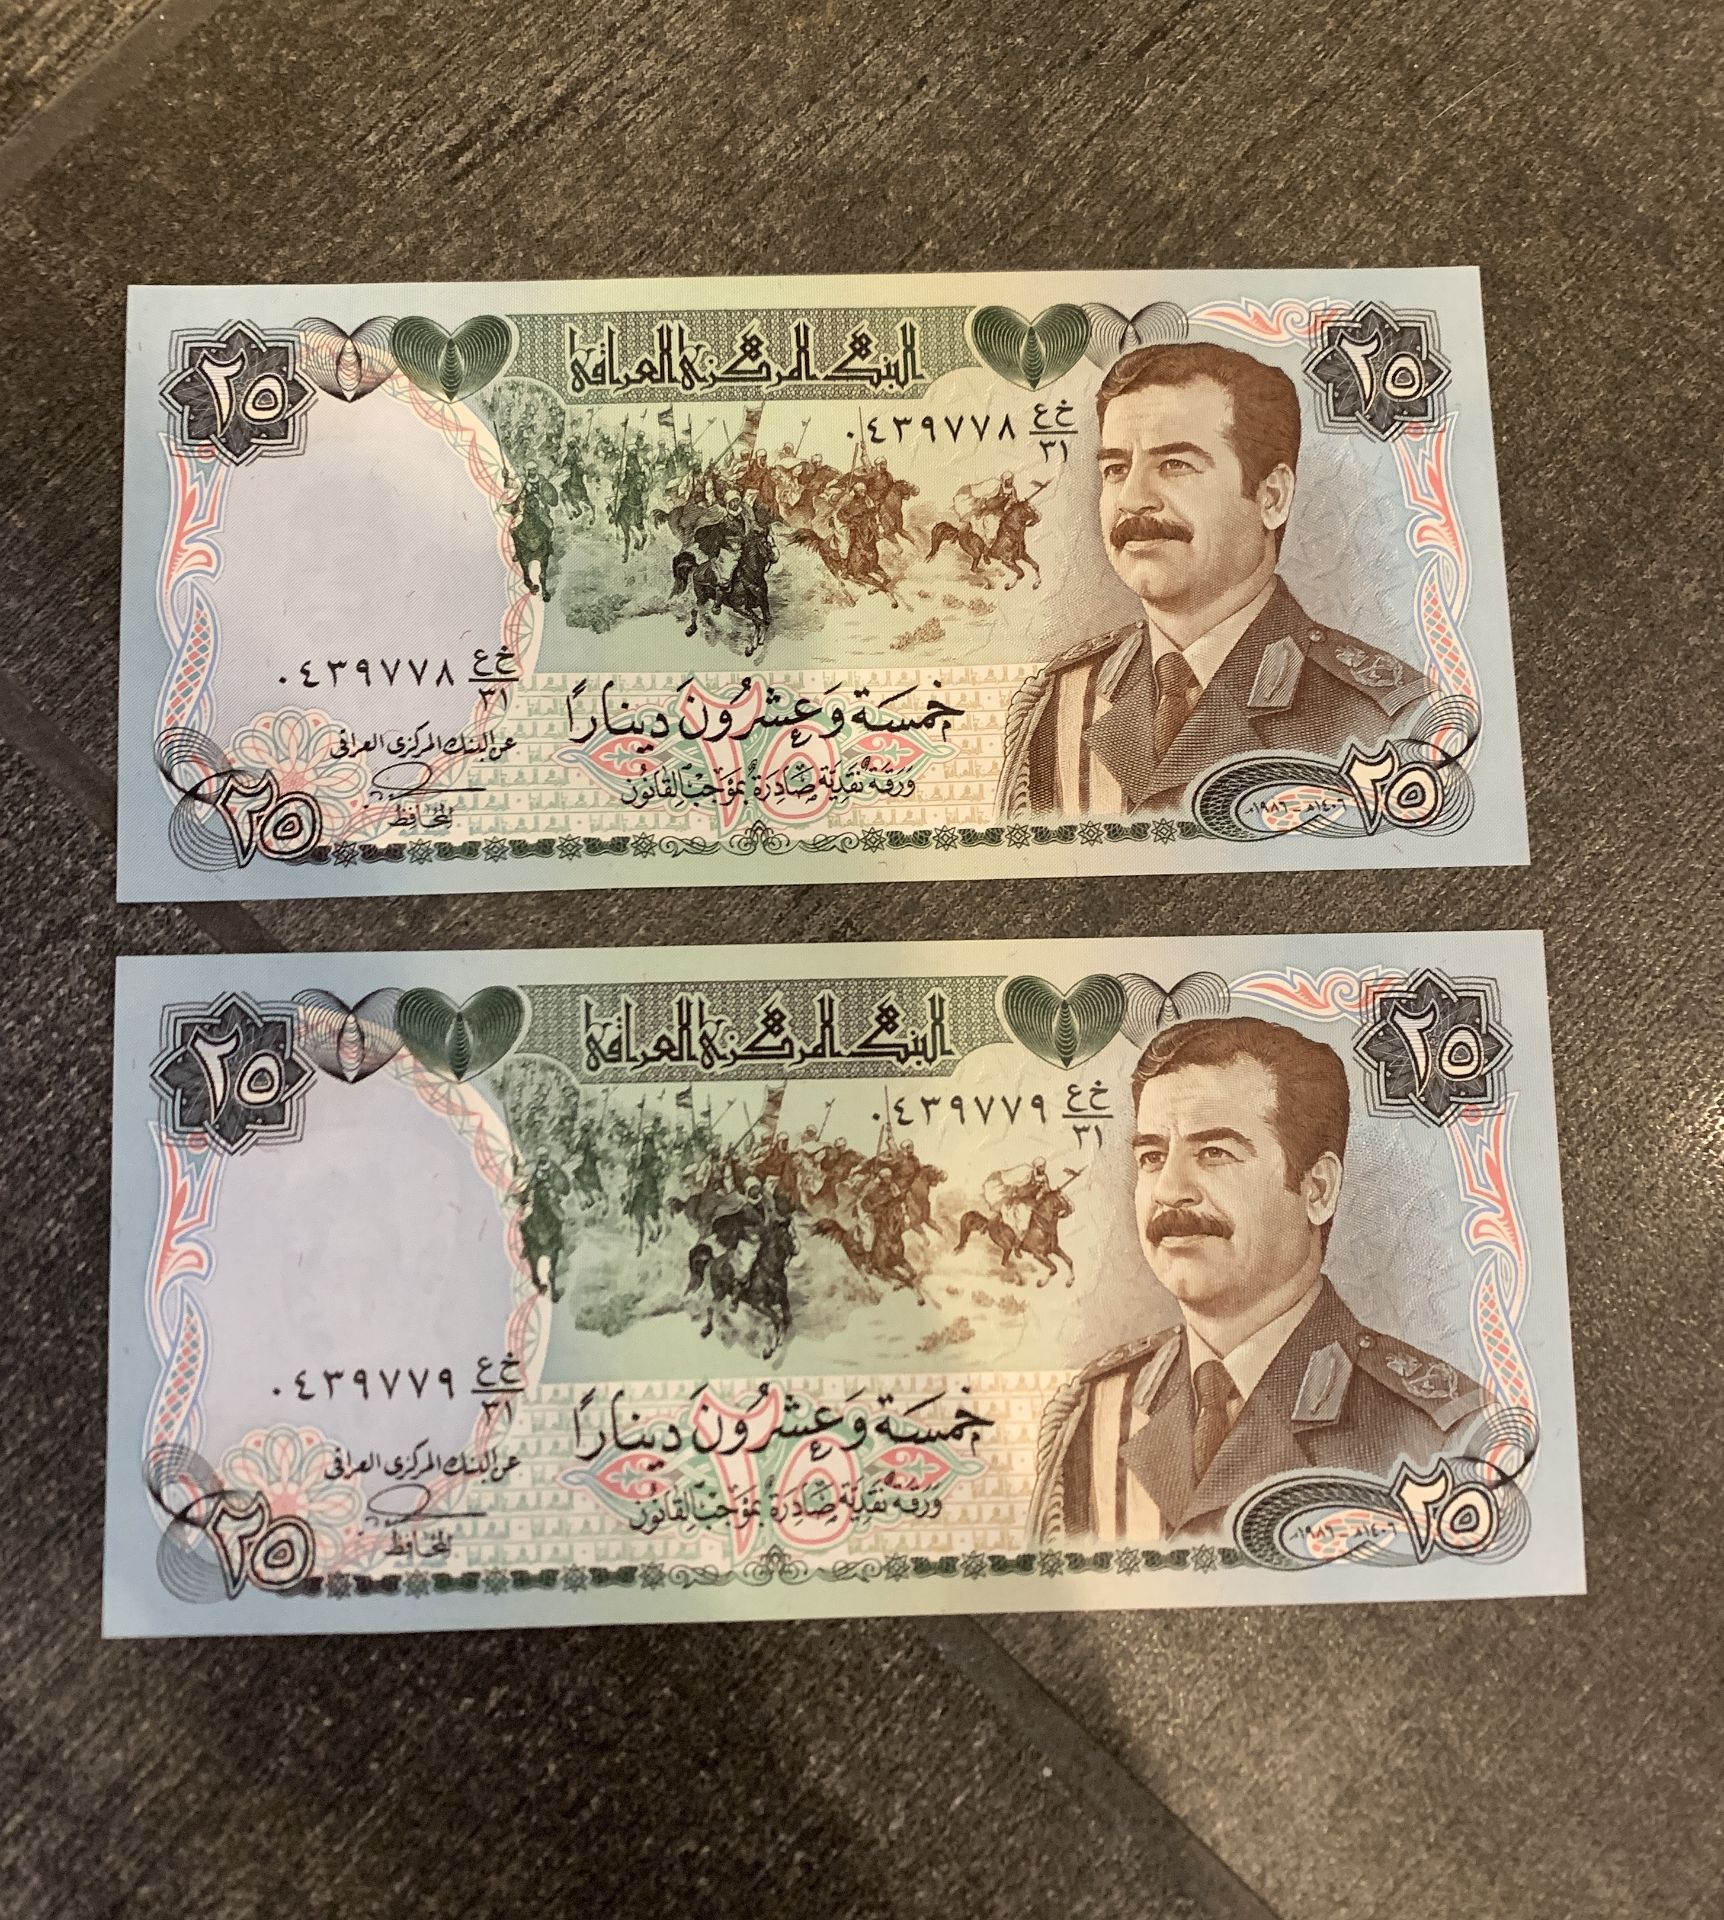 VERY RARE 2 - 100% PERFECT CRISP CENTRAL BANK OF IRAQ NOTE WITH SADDAM HUSSEIN FACE, RARE FIND - Image 2 of 2